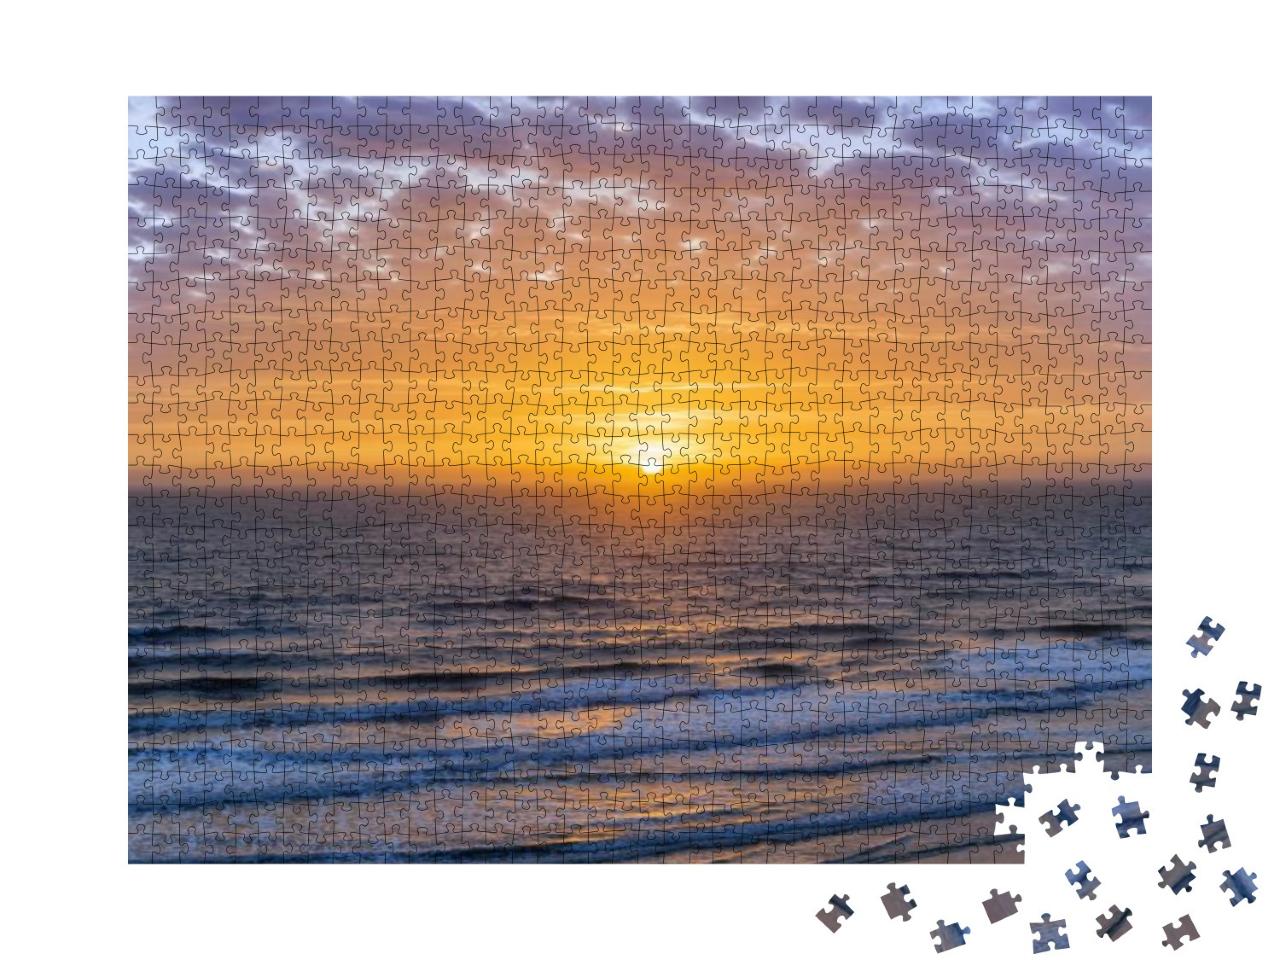 Sunrise Over Atlantic Ocean with Dramatic Sky in Florida... Jigsaw Puzzle with 1000 pieces